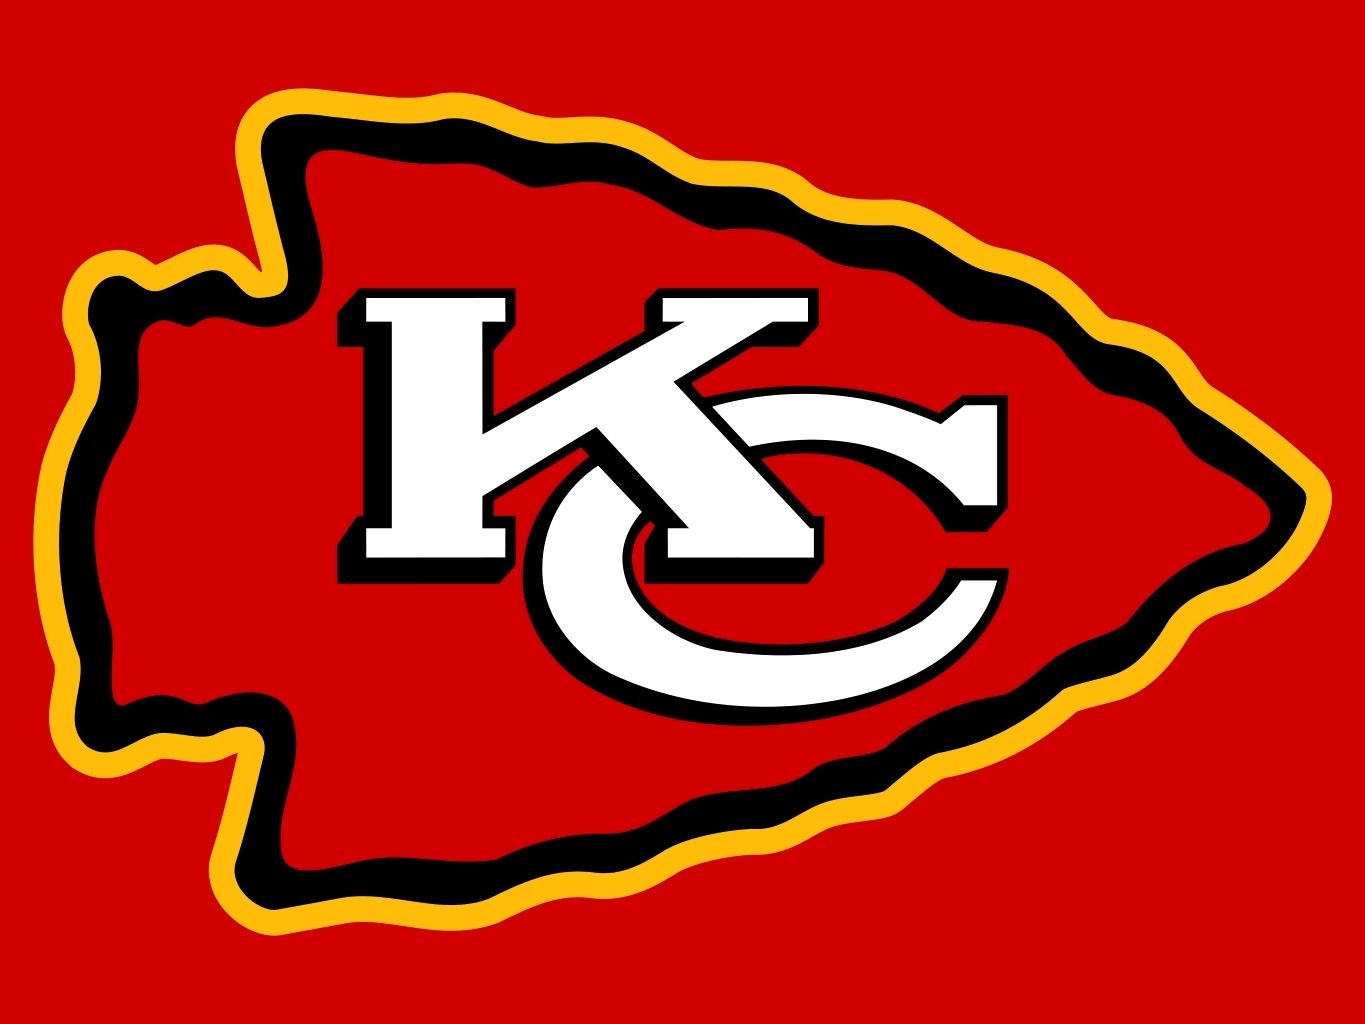 FREE Kansas City Chiefs wallpapers for desktop and smart phone